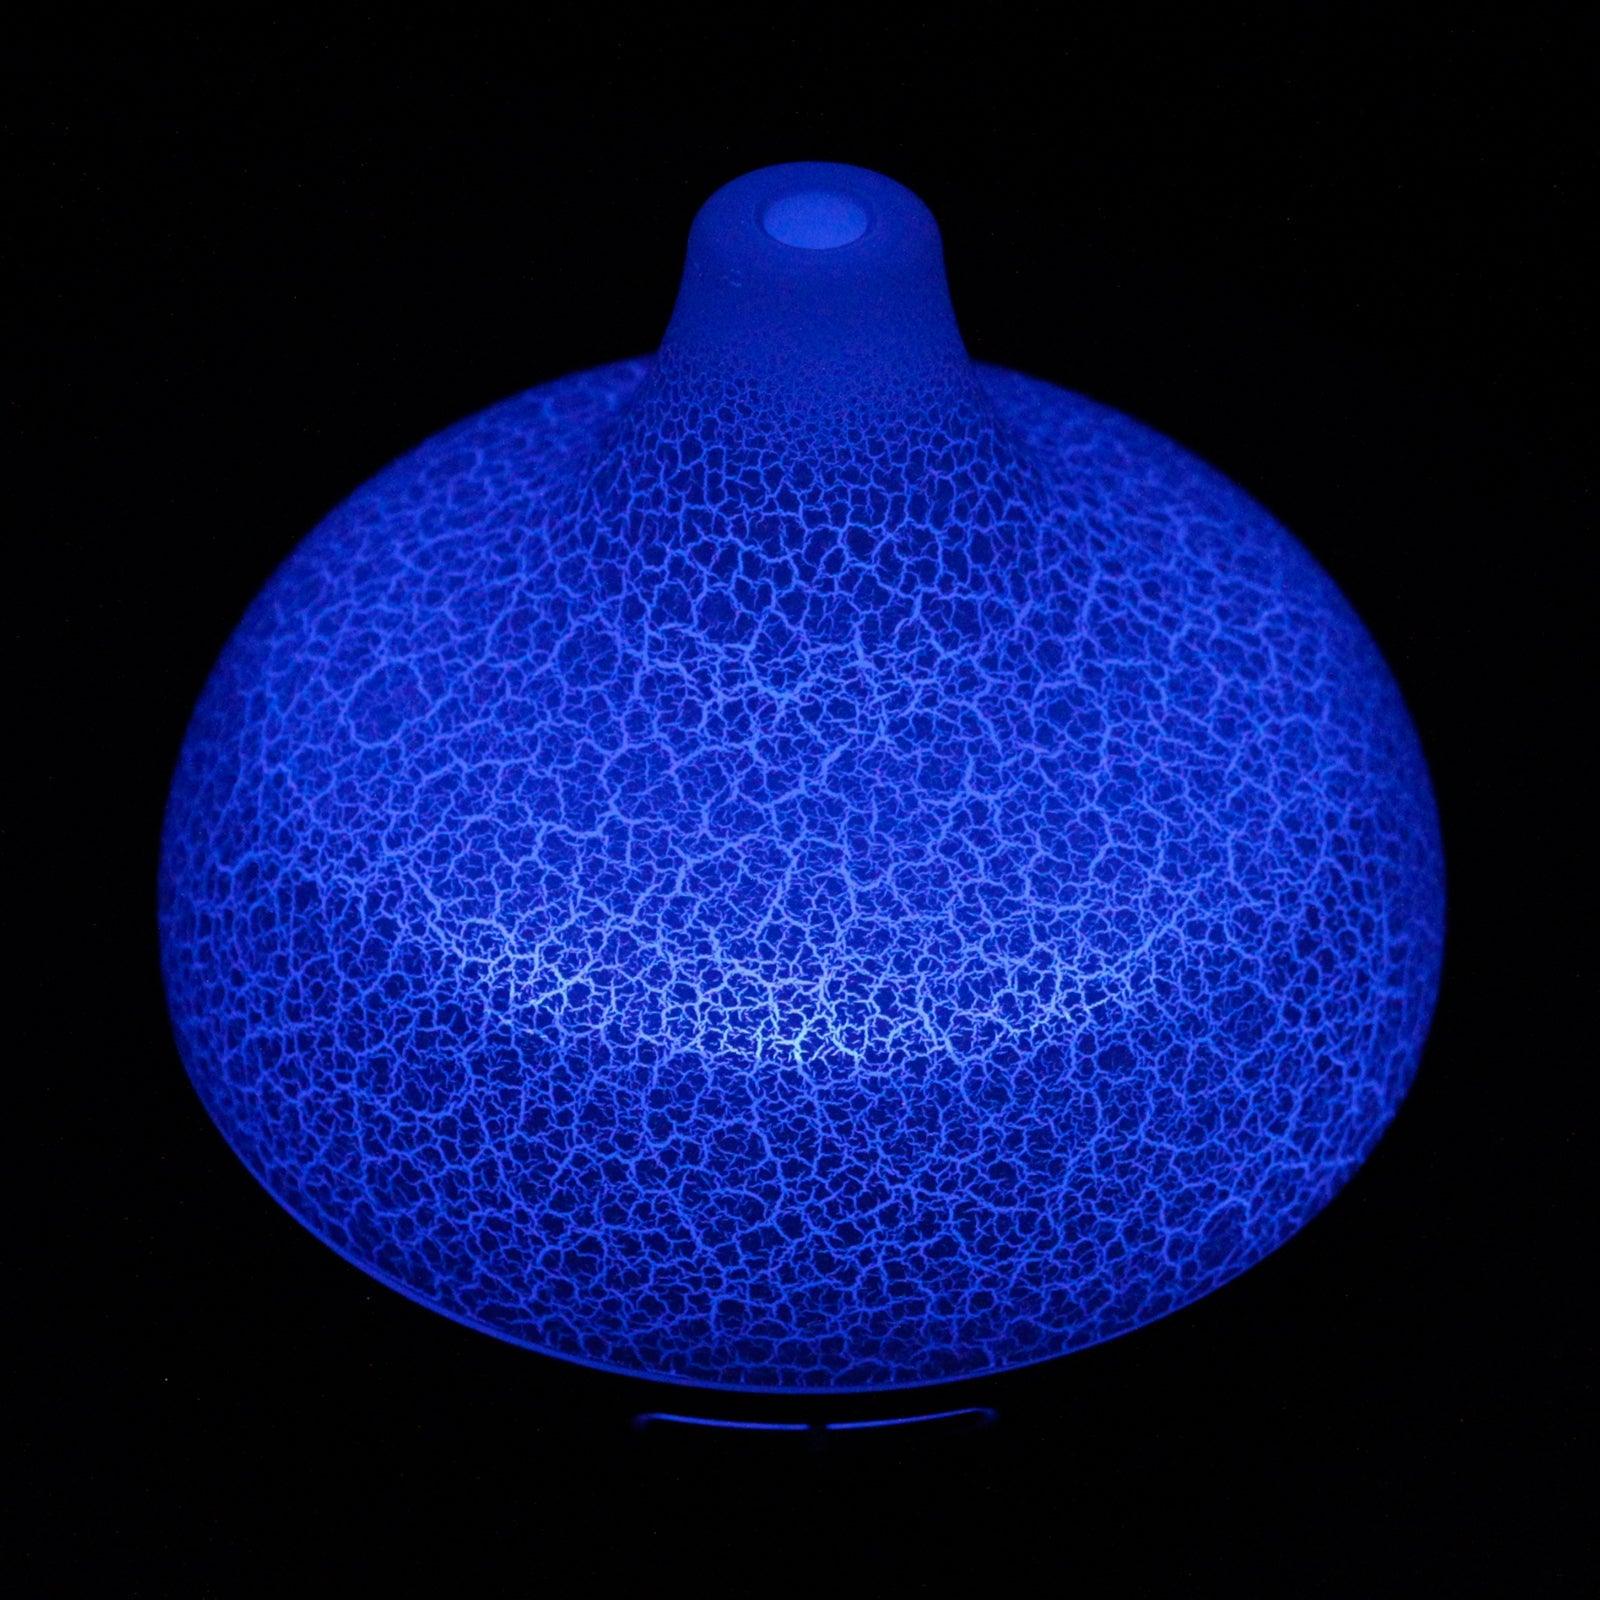 Santorini Atomiser / Aroma Diffuser - Shell Effect - USB - Colour Change - Timer - Charming Spaces